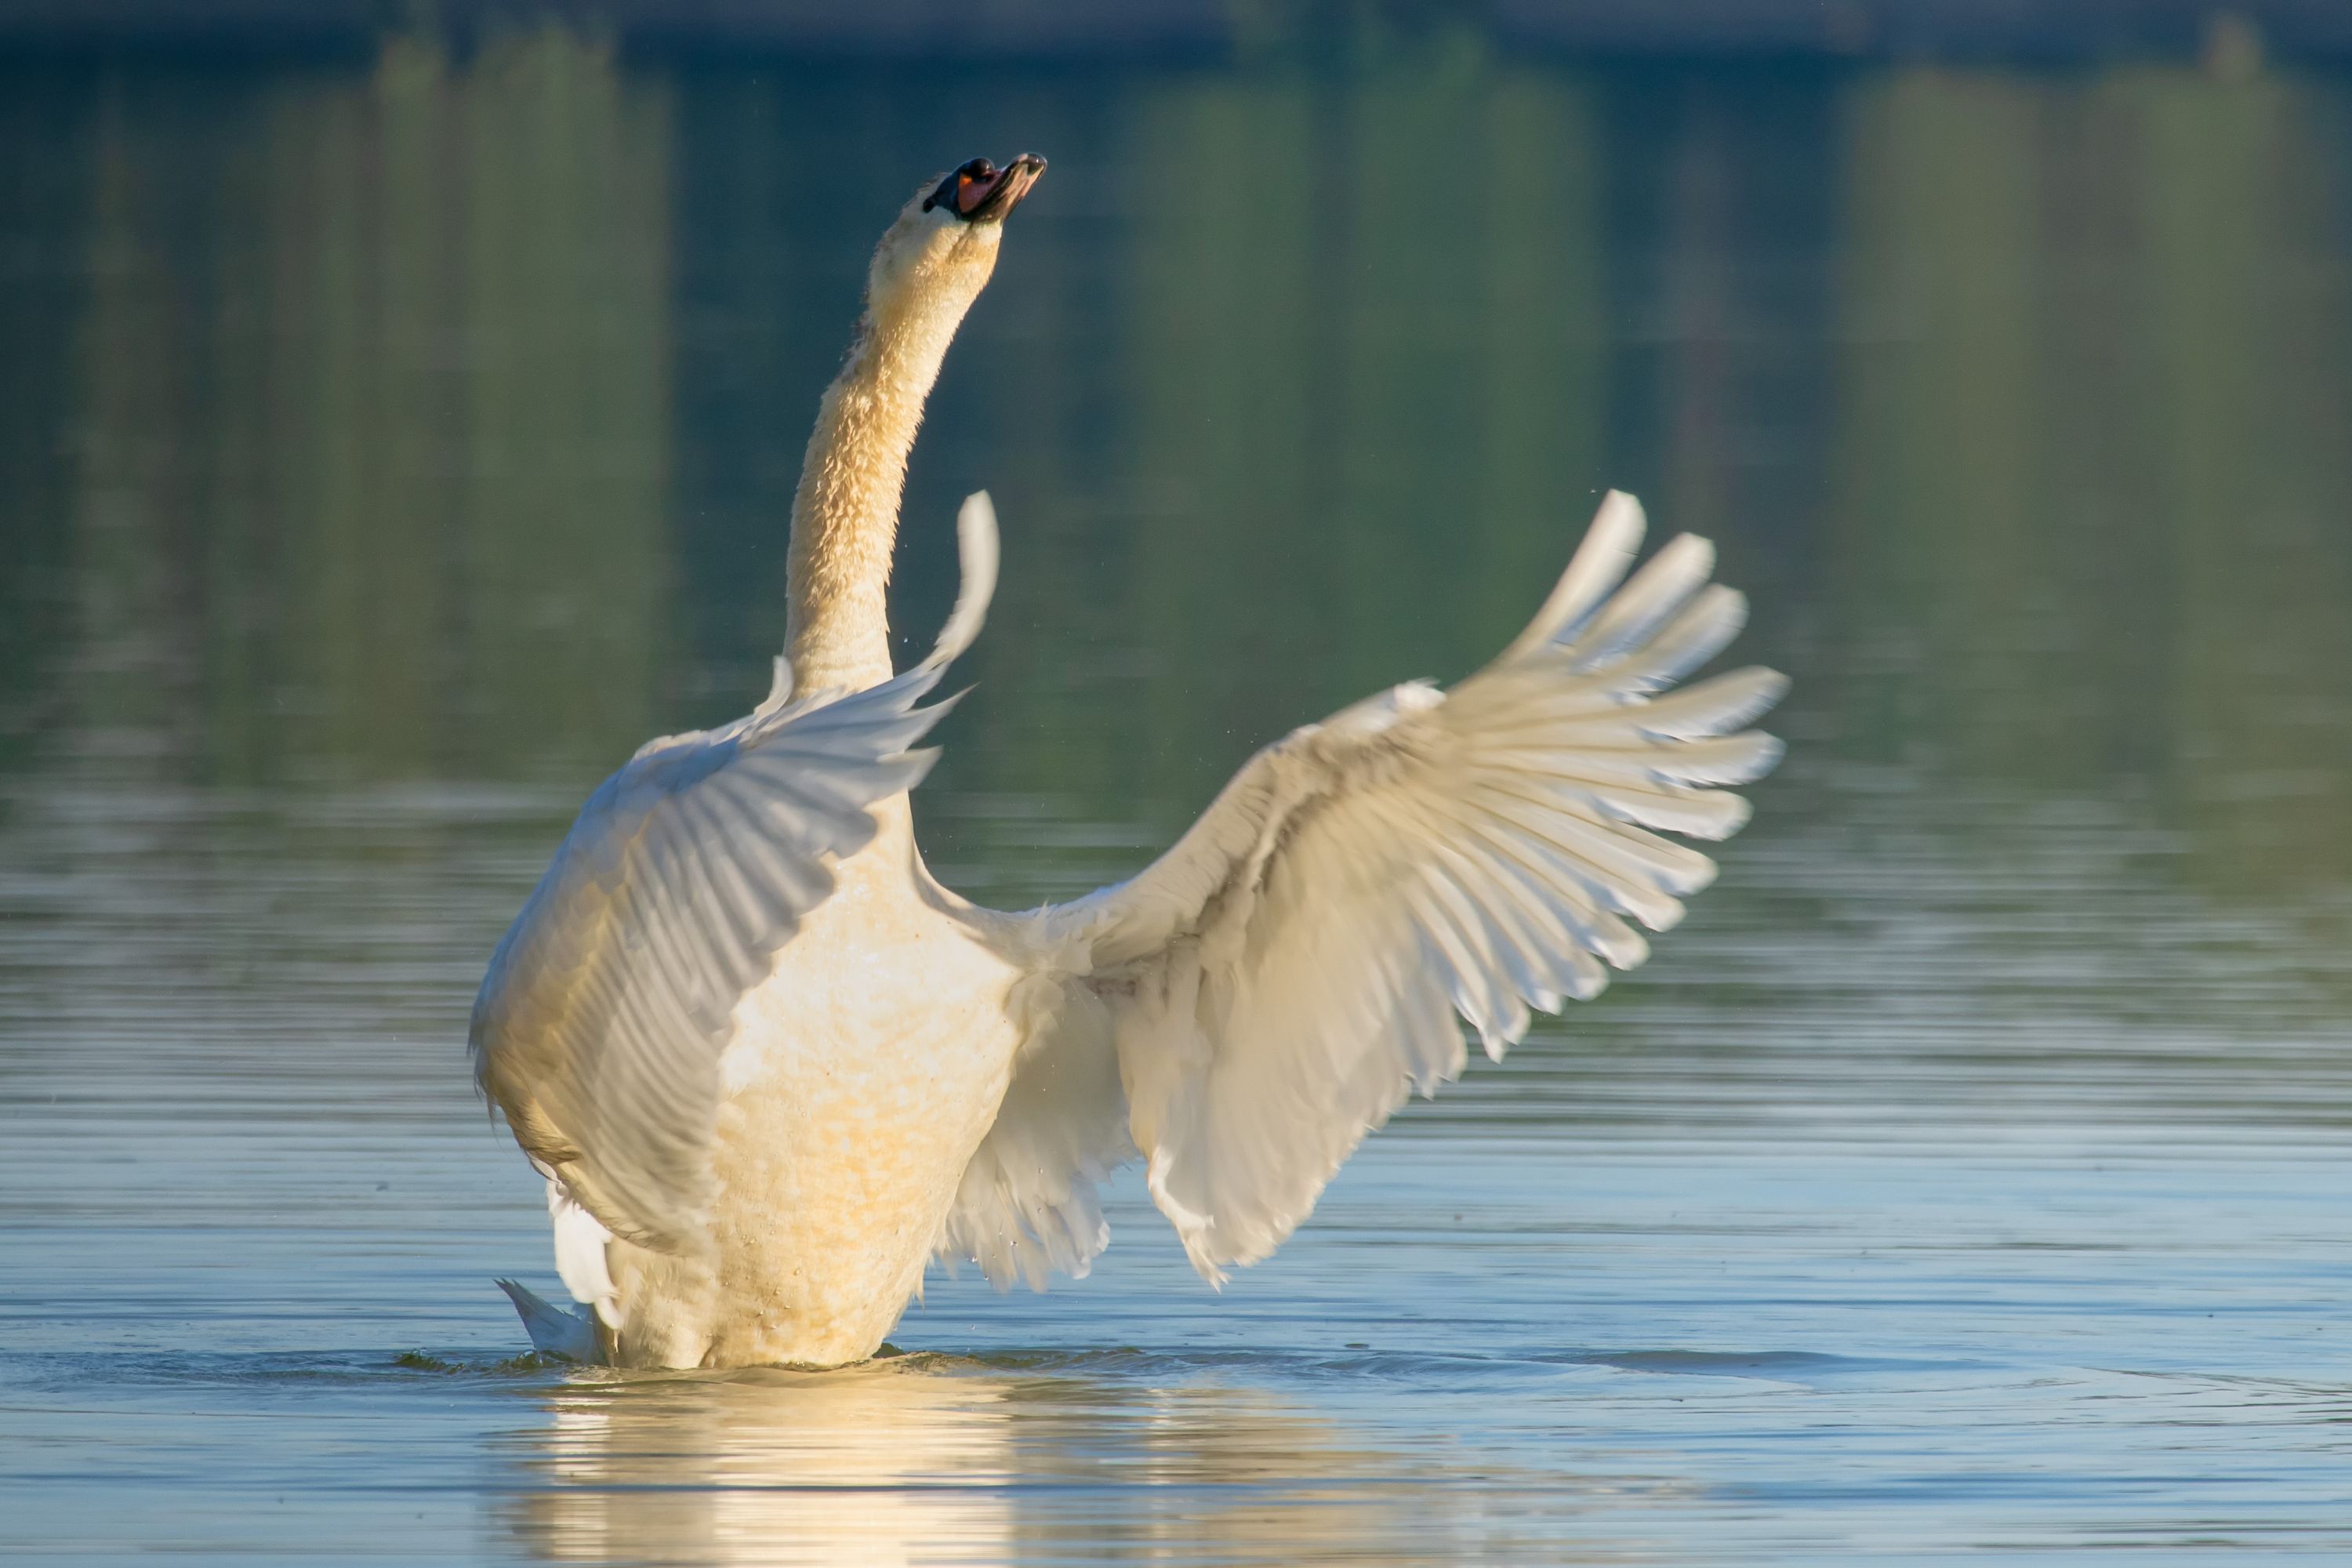 Swan - conductor of the philharmonic